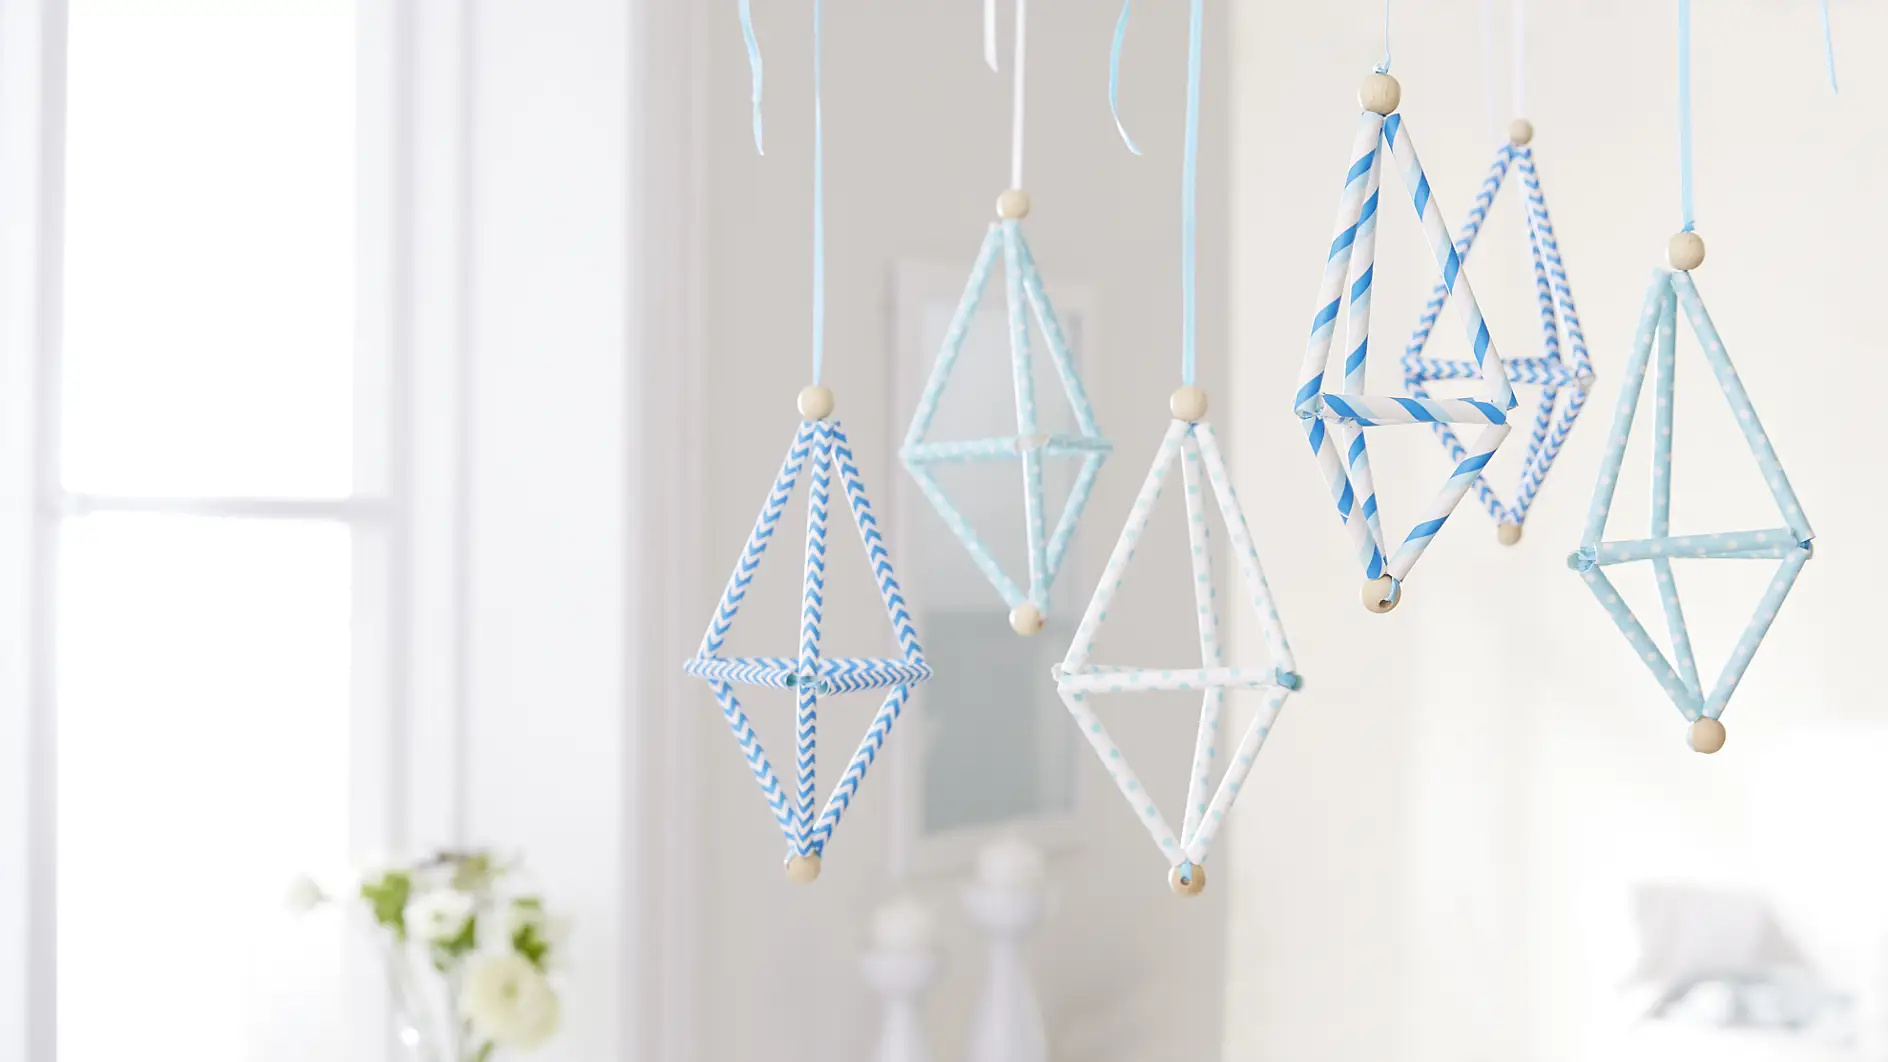 Home decor for baby rooms: The geometric mobile made from straws is fixed with the removable adhesive hooks Powerstrips® Transparent DECO Hook LARGE. Perfect for decorating ideas!